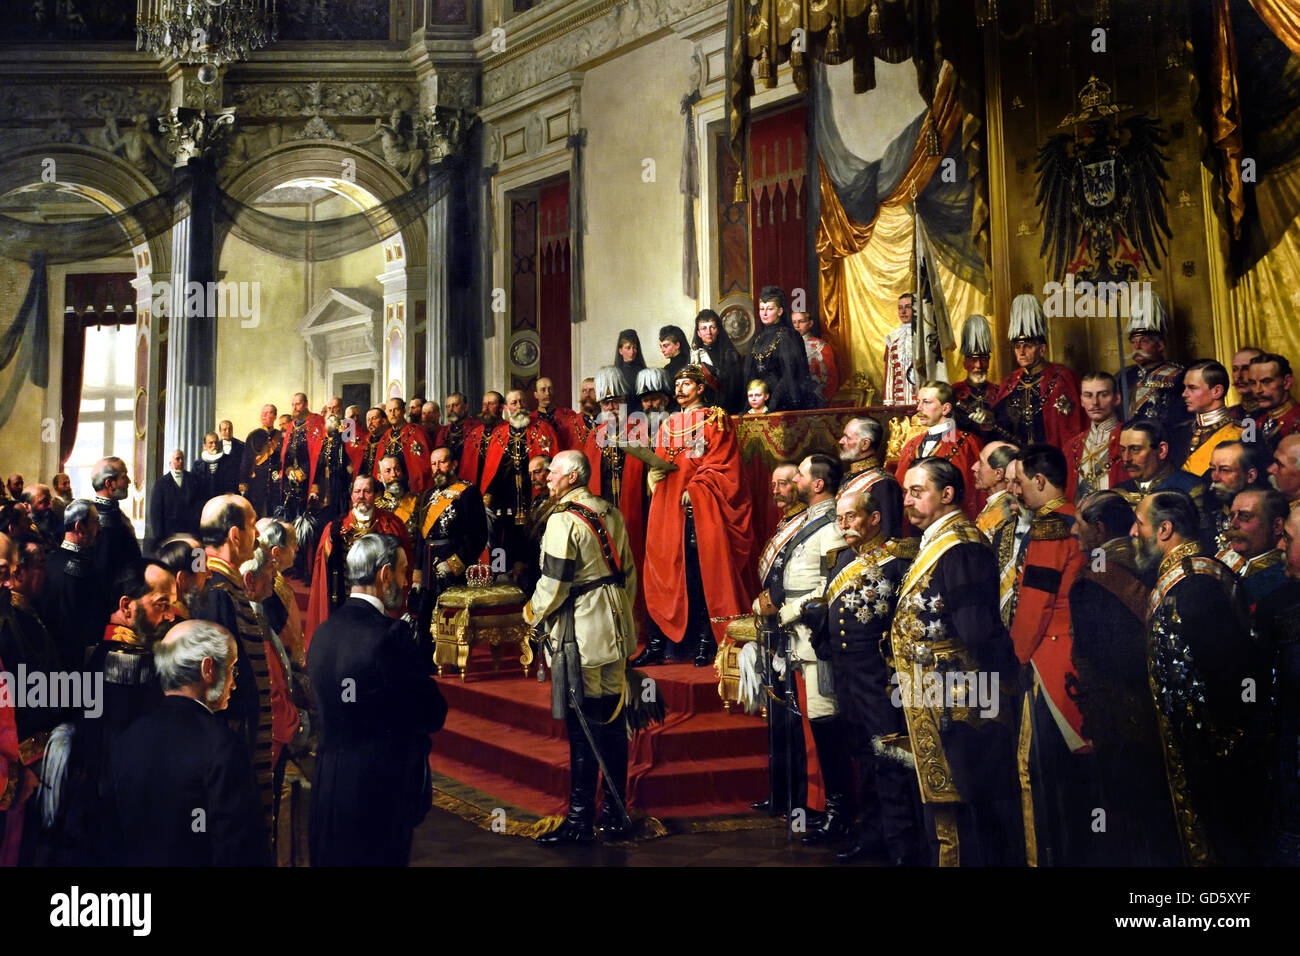 Inauguration of the Reichstags  by Wilhelm II White Hall of the Berlin City Palace German Germany (  The opening of the Reichstag in the White Hall of the Berlin Schloss, by Wilhelm II. June 25, 1888) Stock Photo